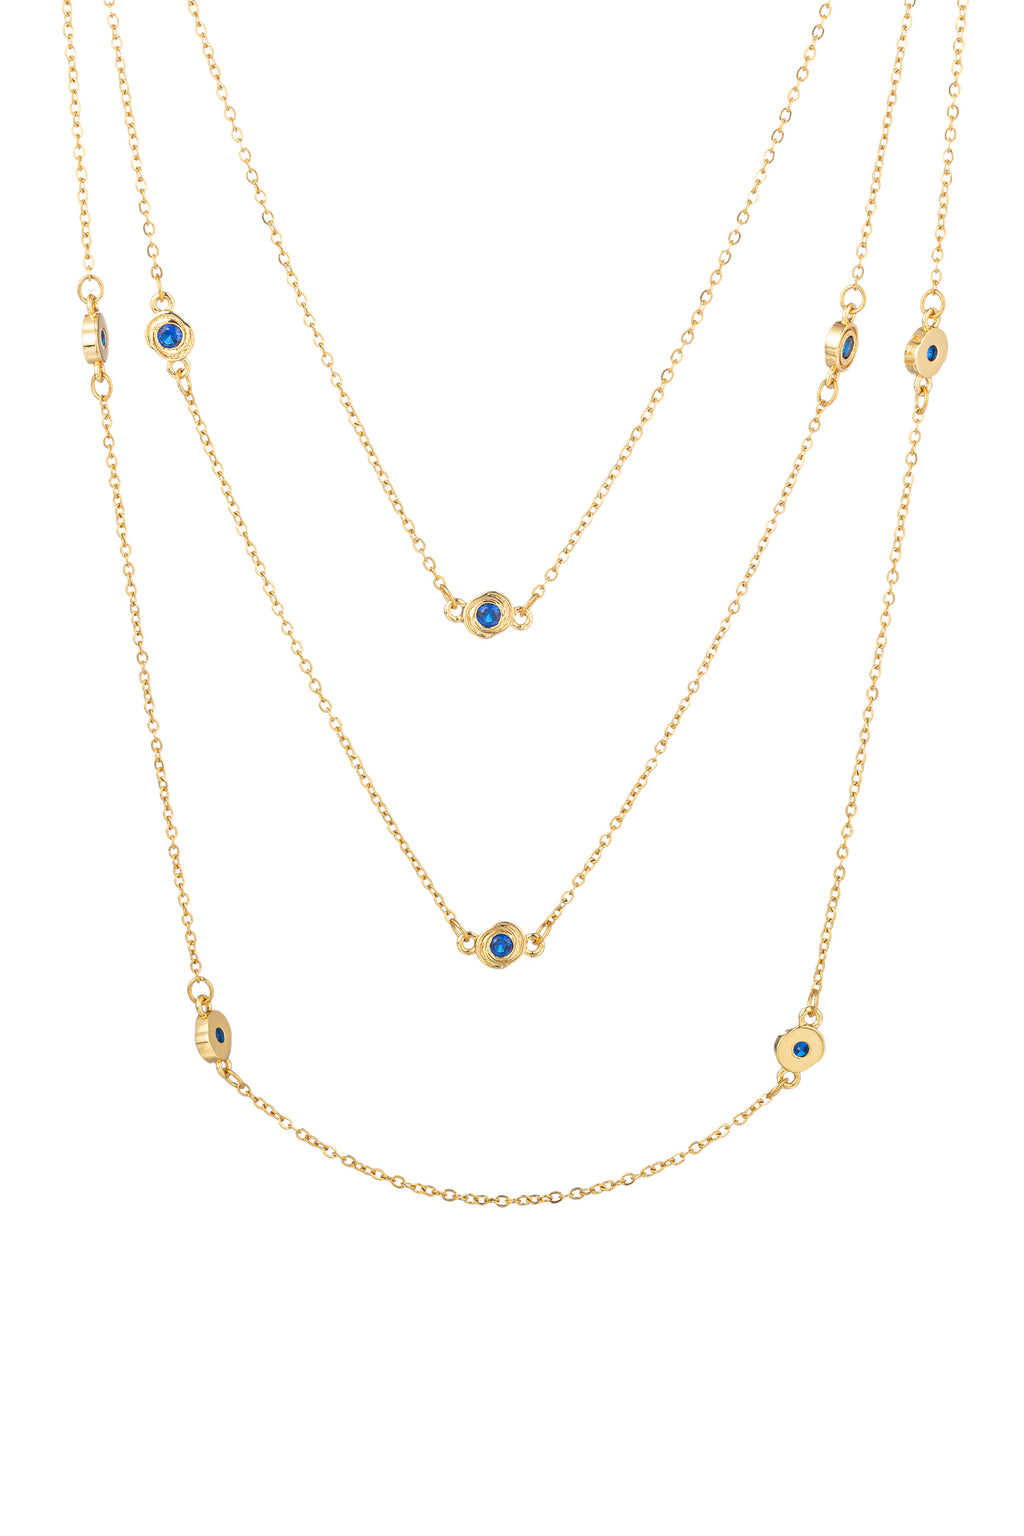 Gold tone brass 3-piece necklace set studded with blue CZ crystals.